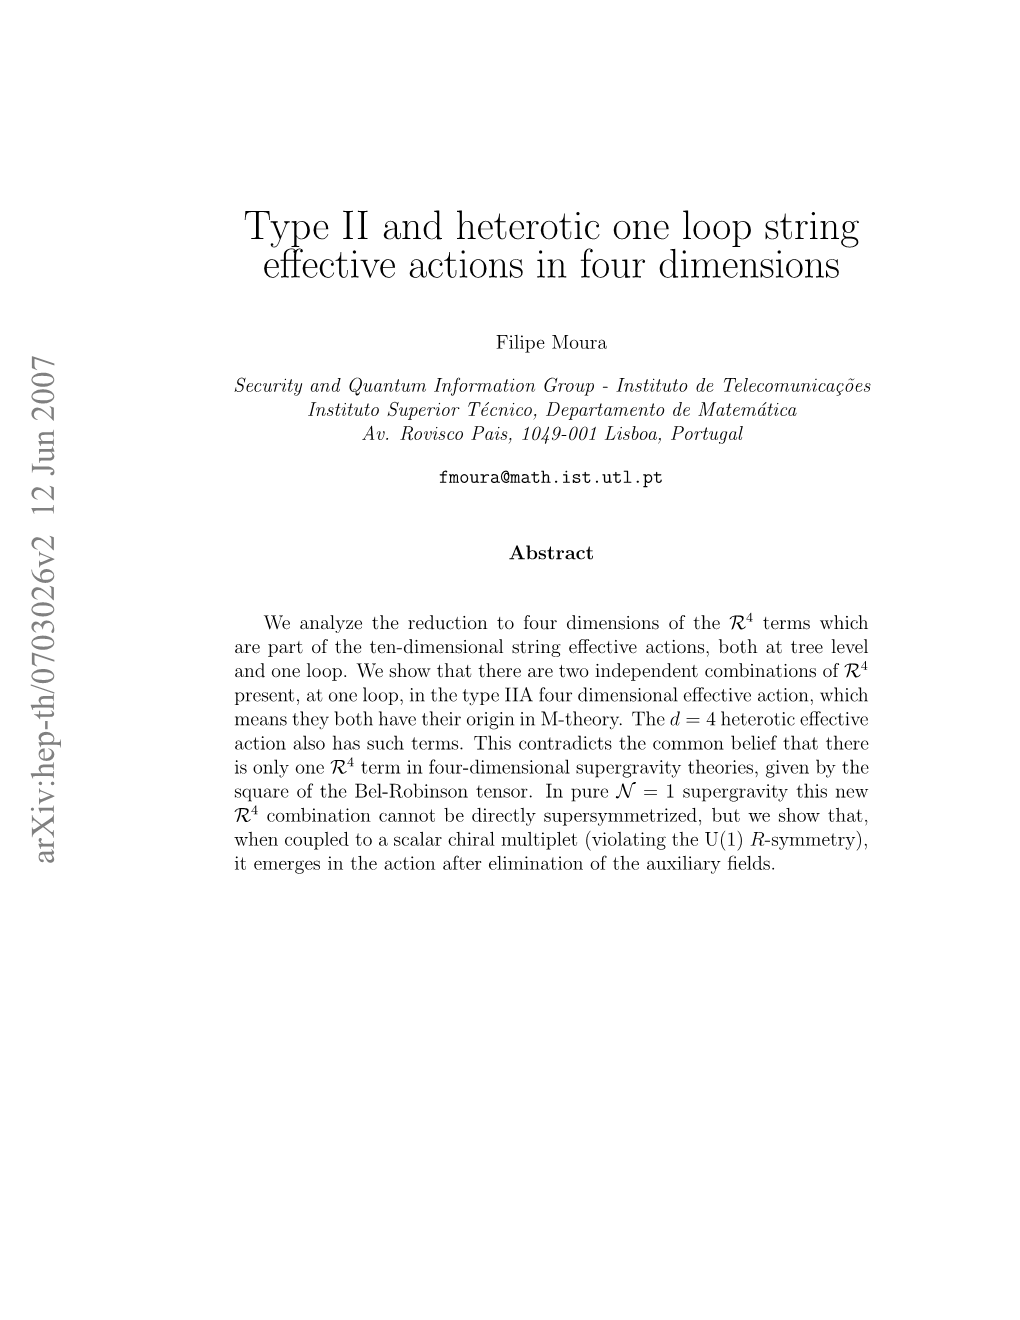 Type II and Heterotic One Loop String Effective Actions in Four Dimensions